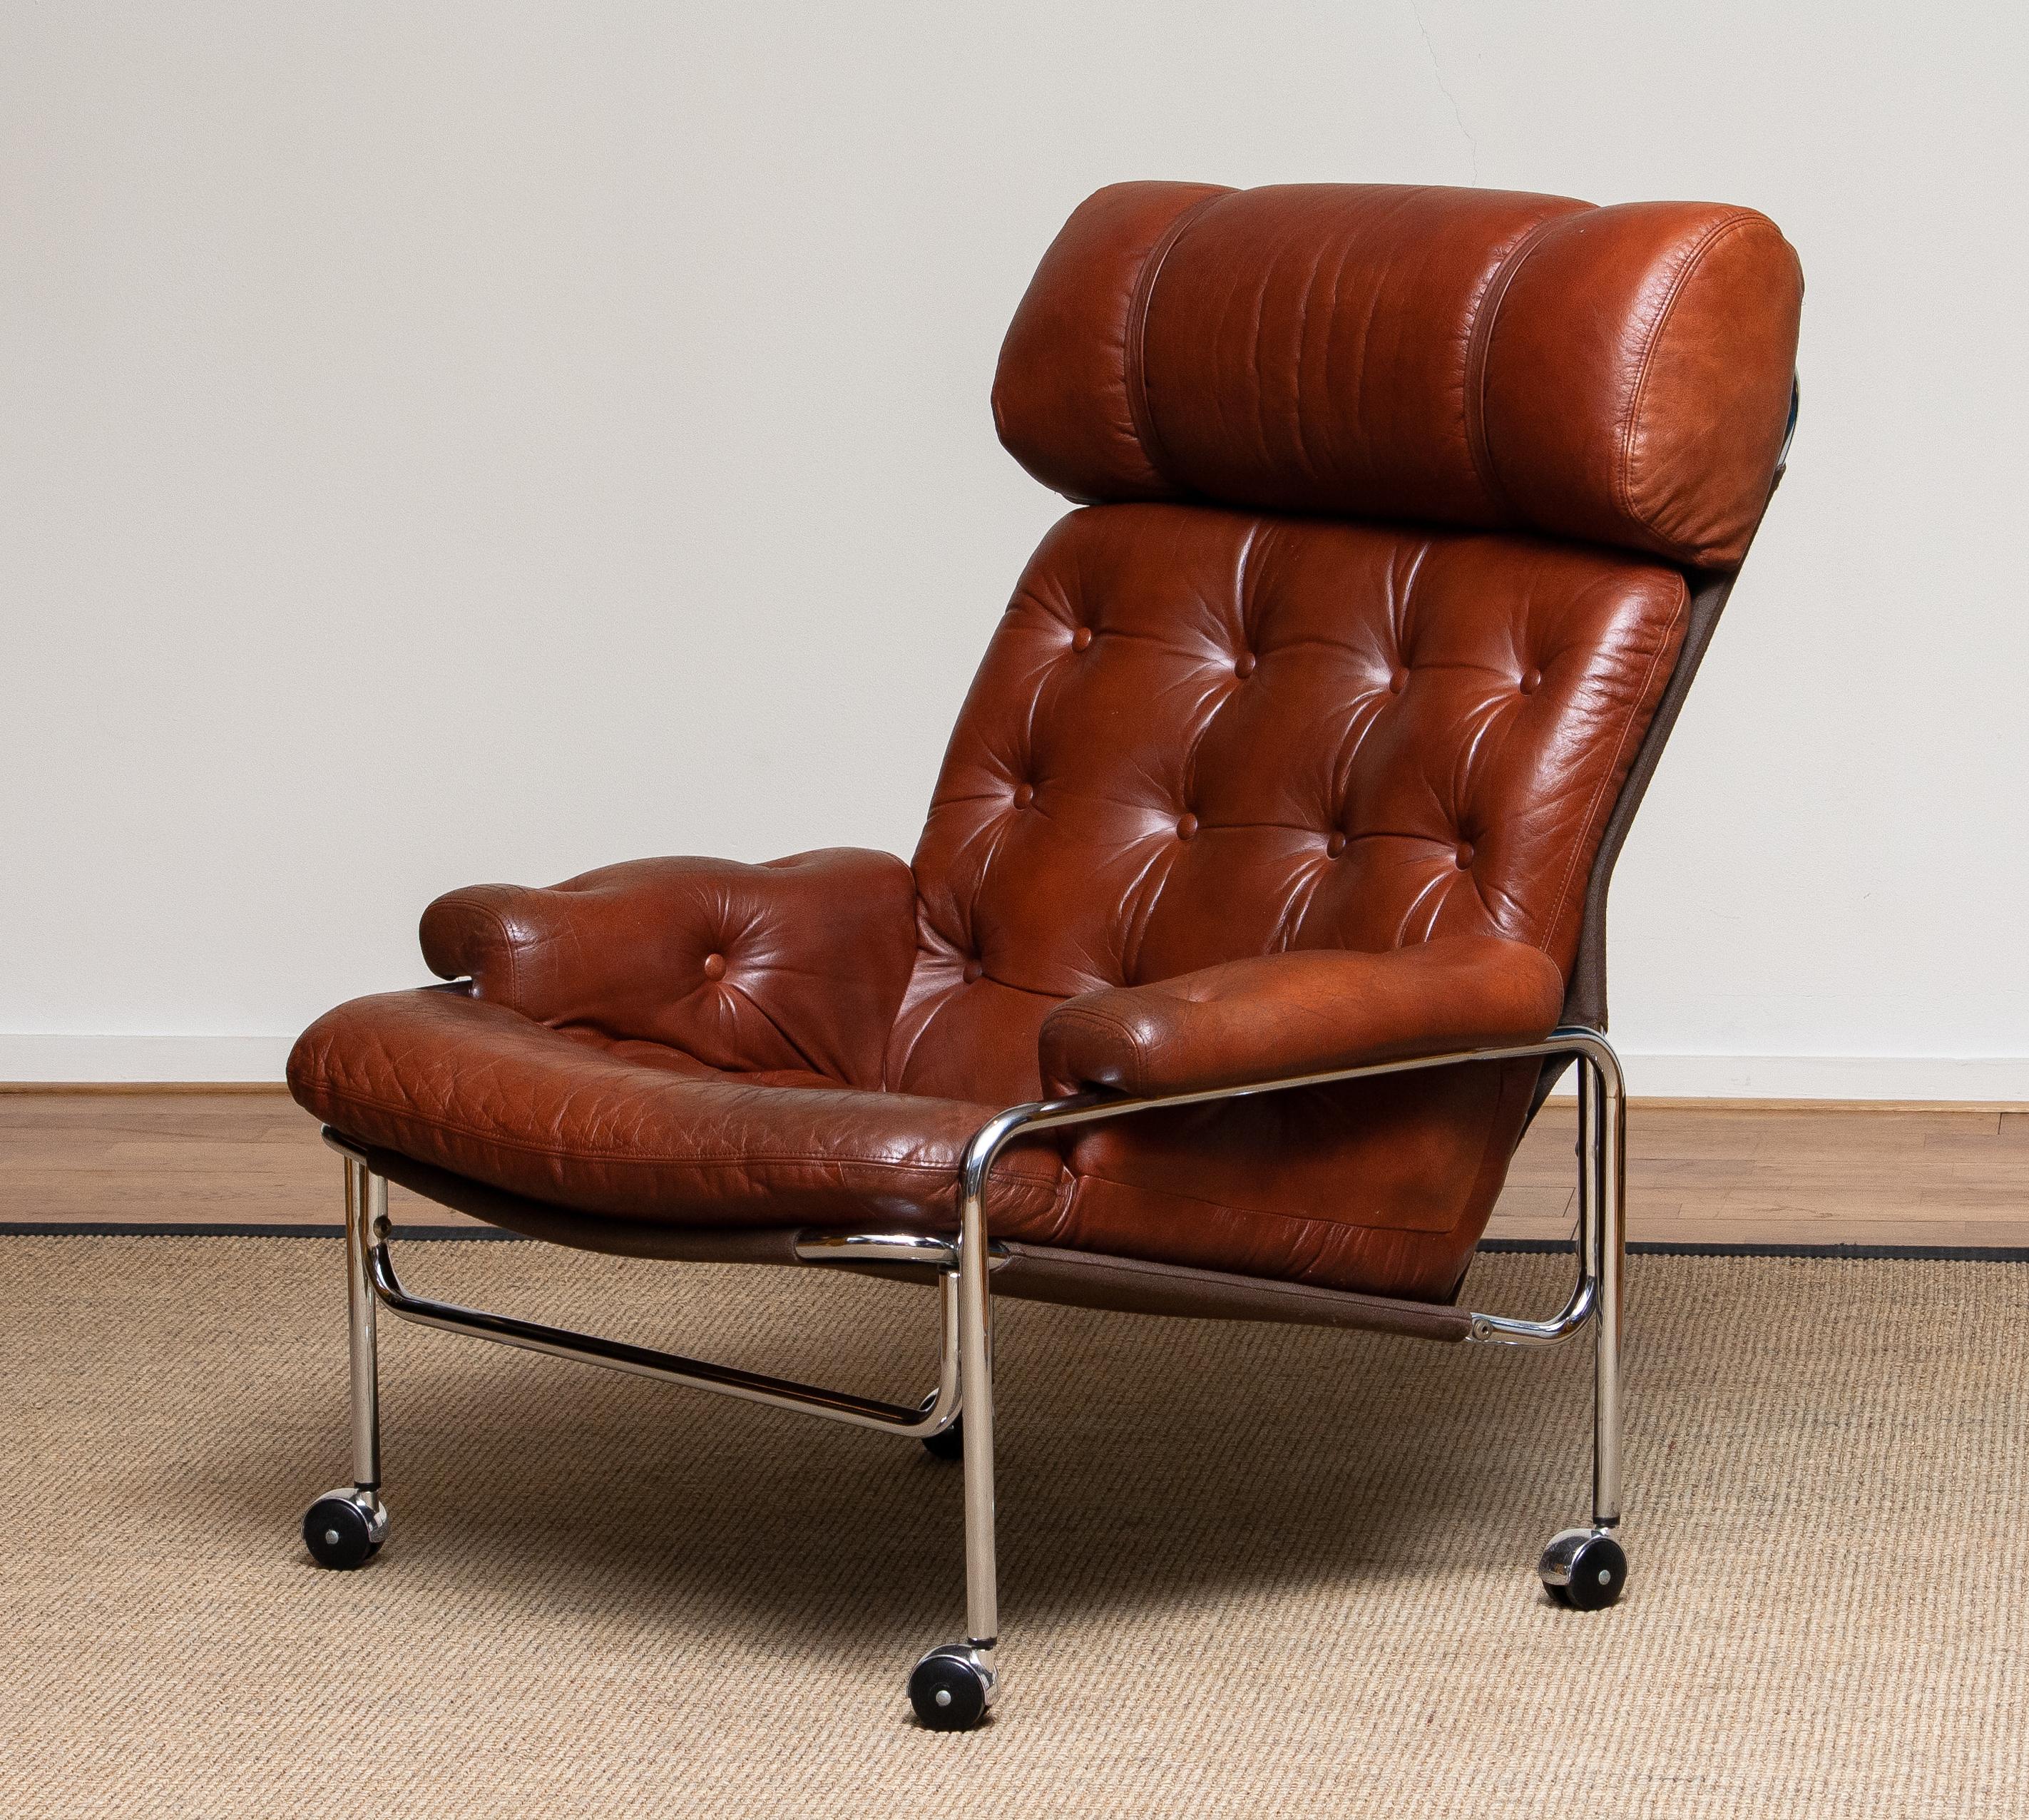 Beautiful lounge / easy chair in aged brown / cognac leather and chrome designed by Pethrus Lindlöfs for A.B. Lindlöfs Möbler Lammhult, Sweden. 
The aged leather on the chairs gives the chairs the typical vintage character. The leather is soft and